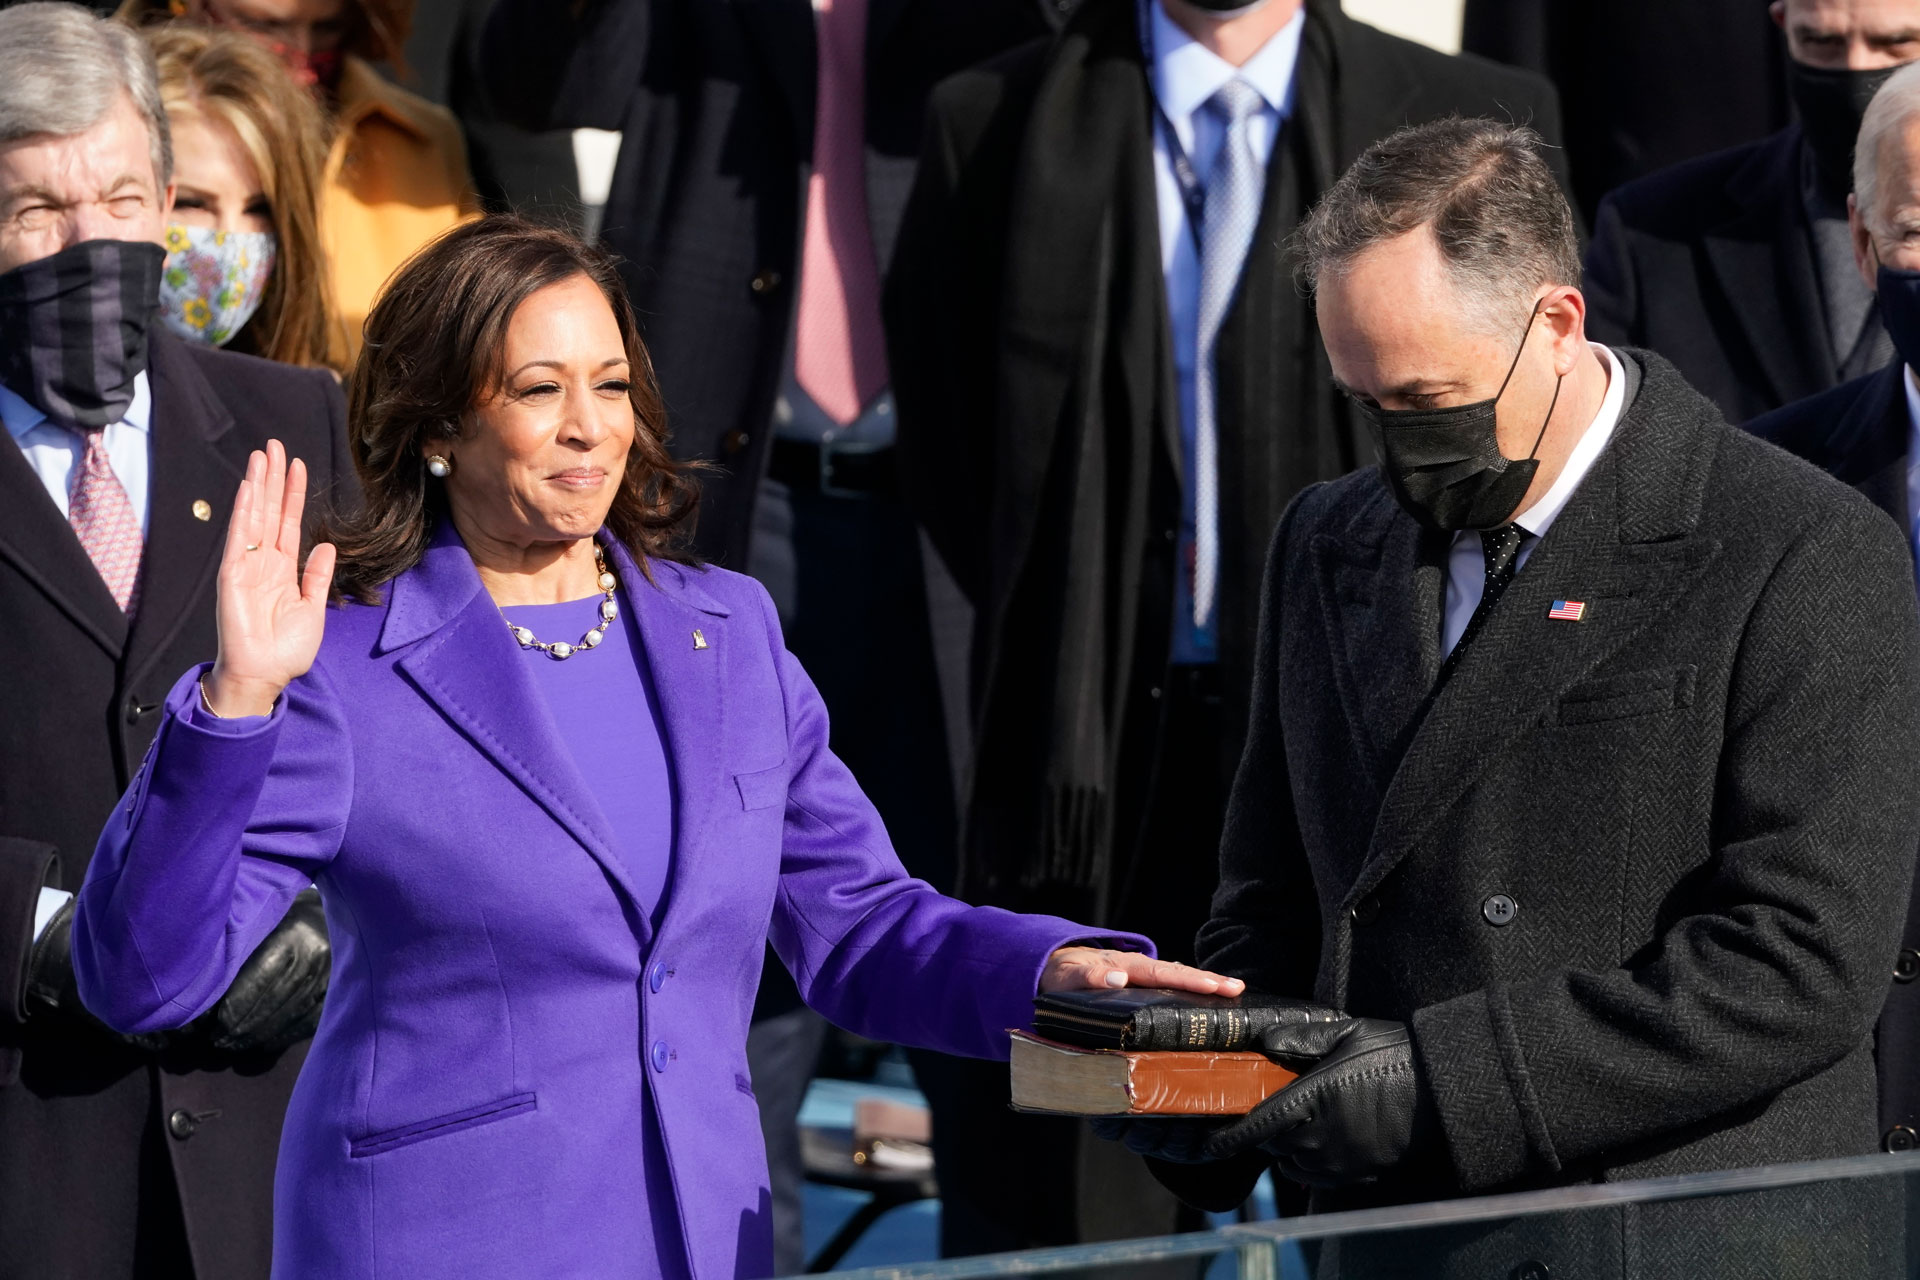 Kamala Harris is sworn in as vice president of the United States 